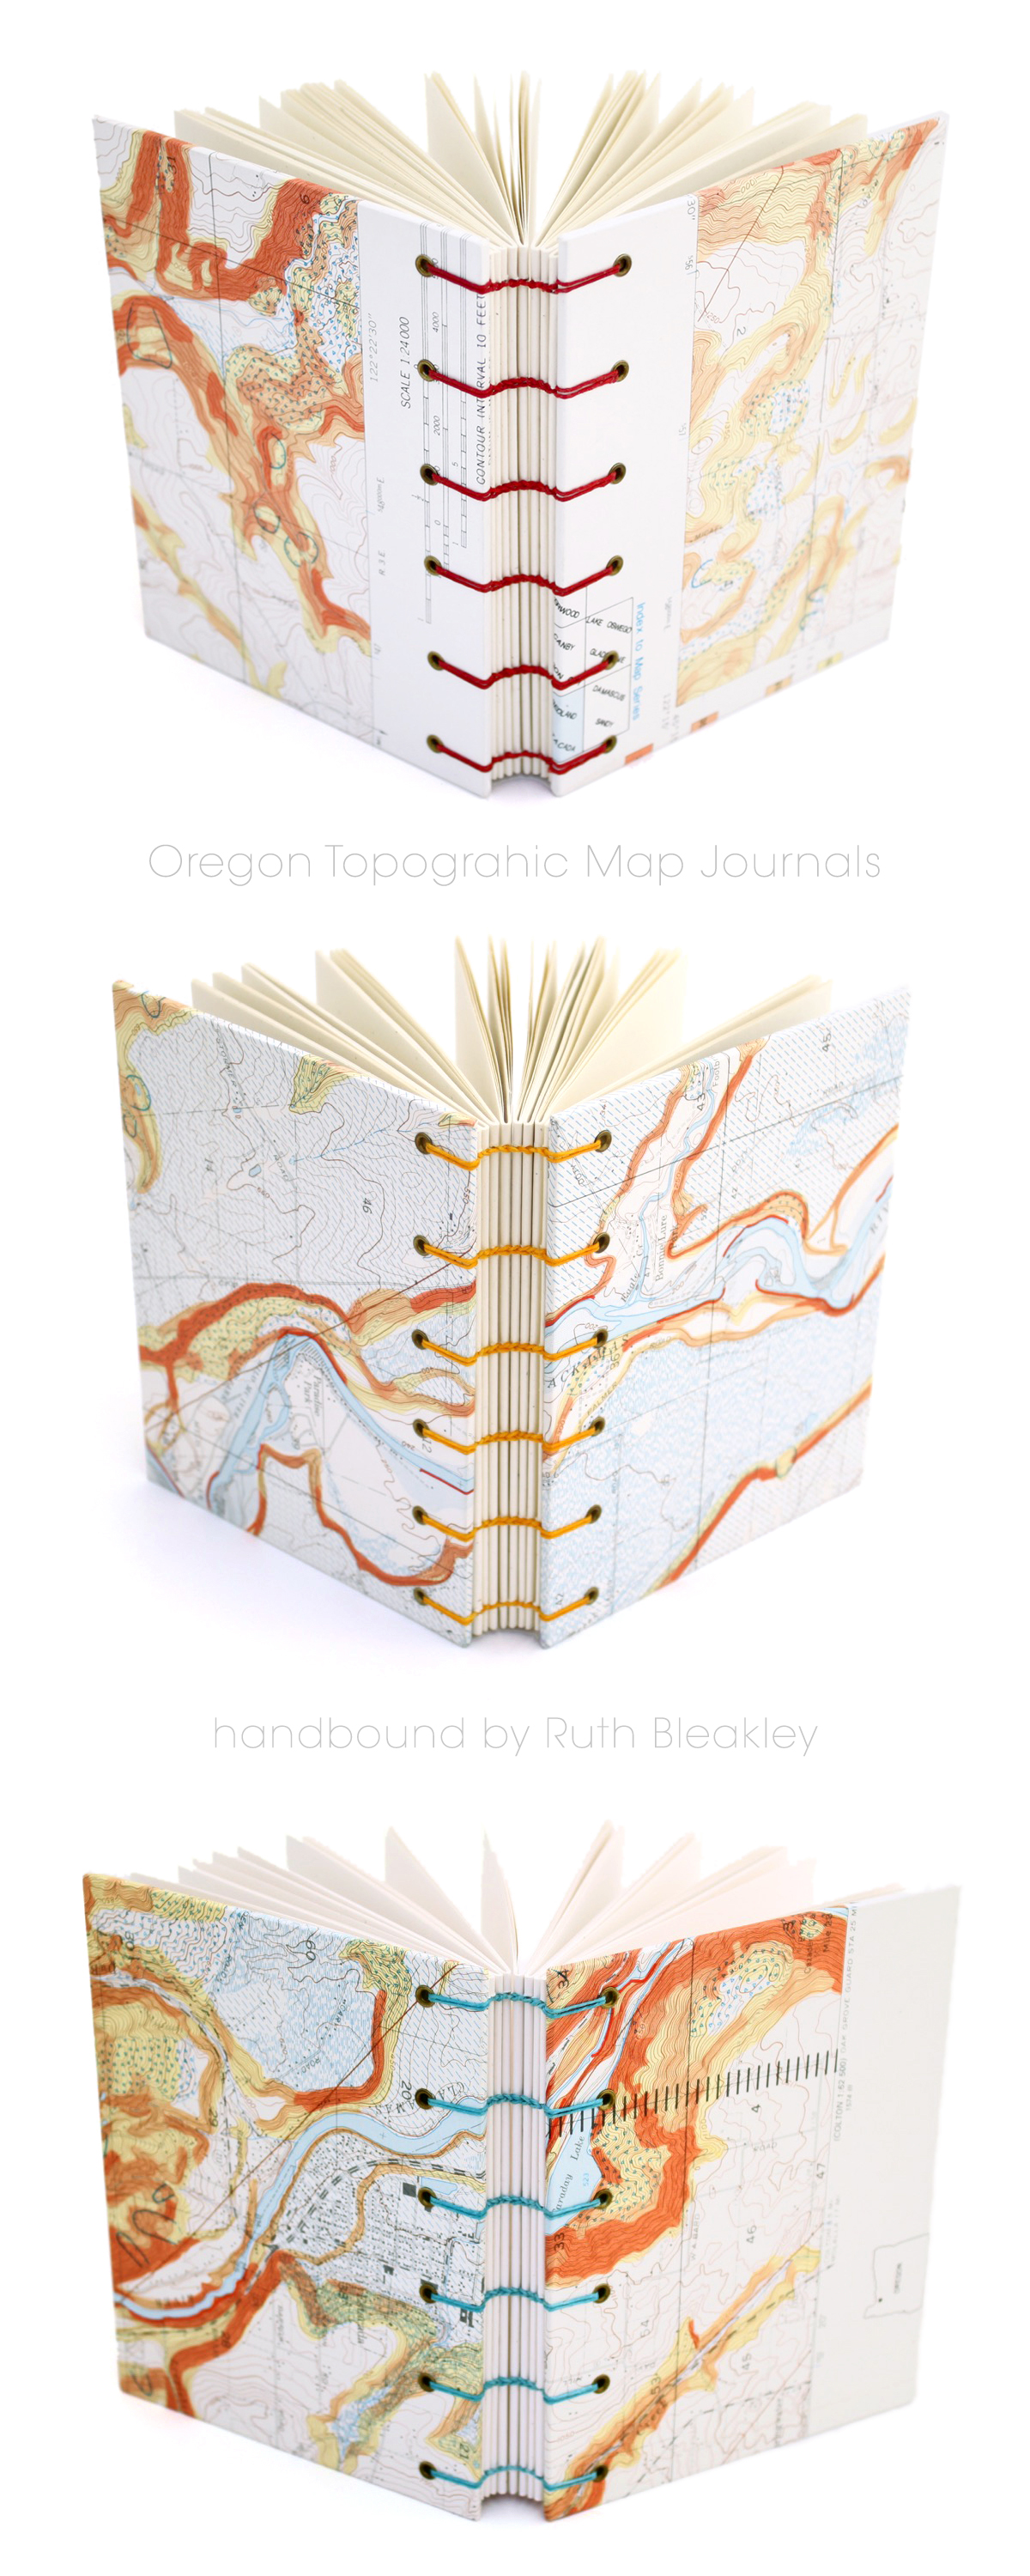 Oregon Topographic Map Journals handmade by Ruth Bleakley